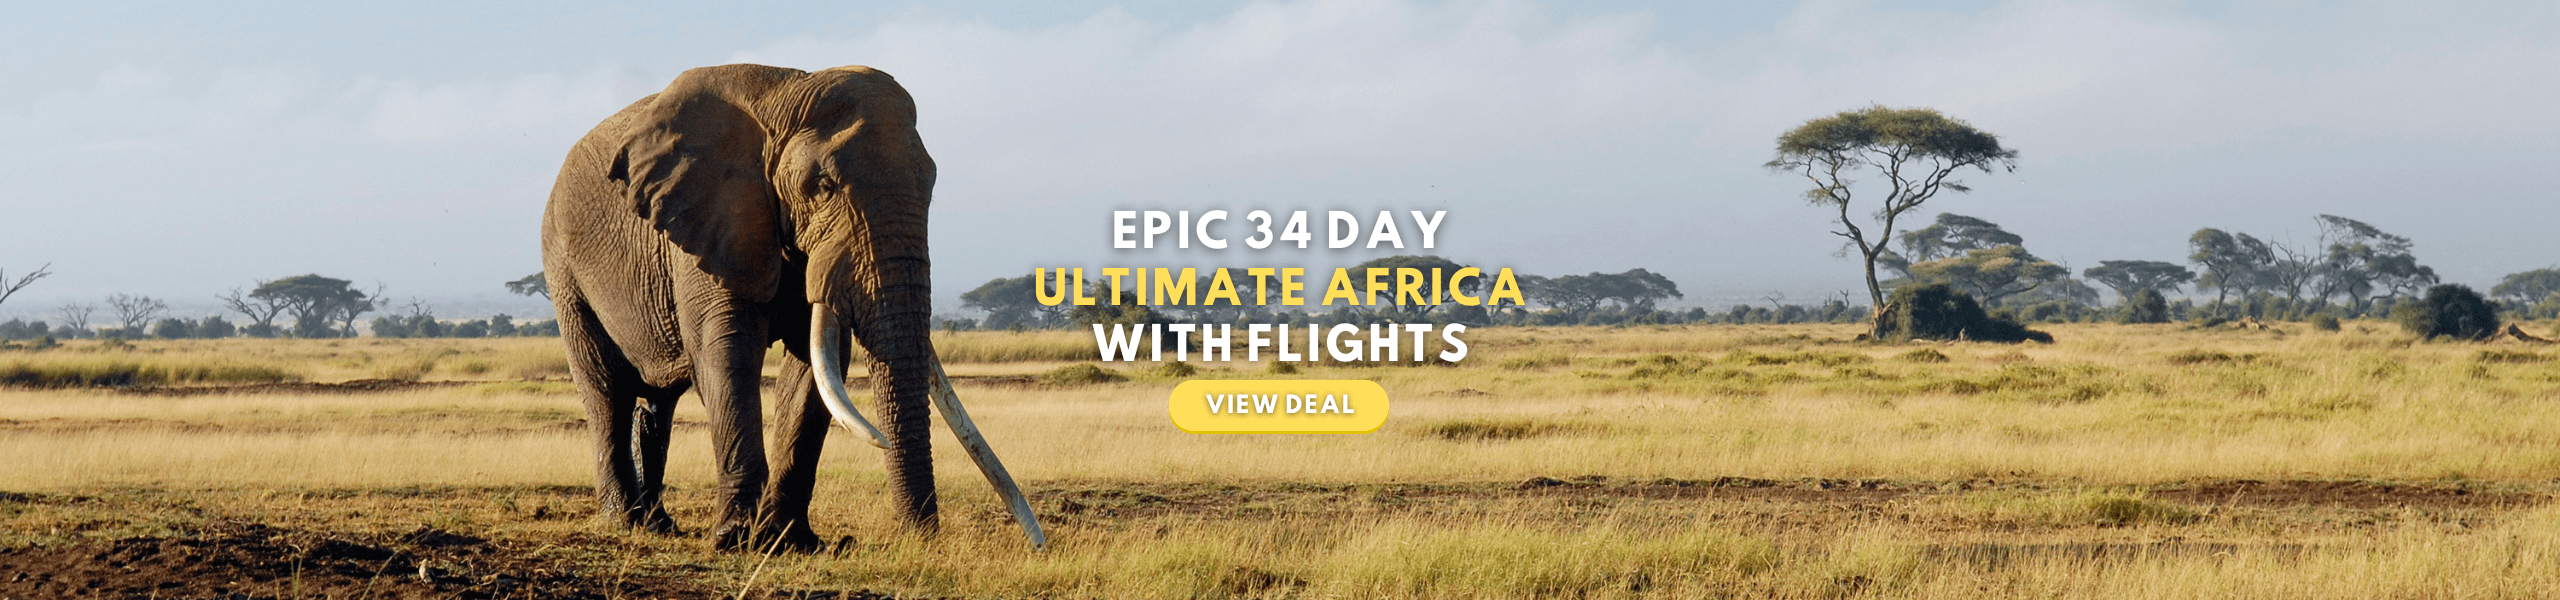 34 Day Ultimate Africa Safari With Flights